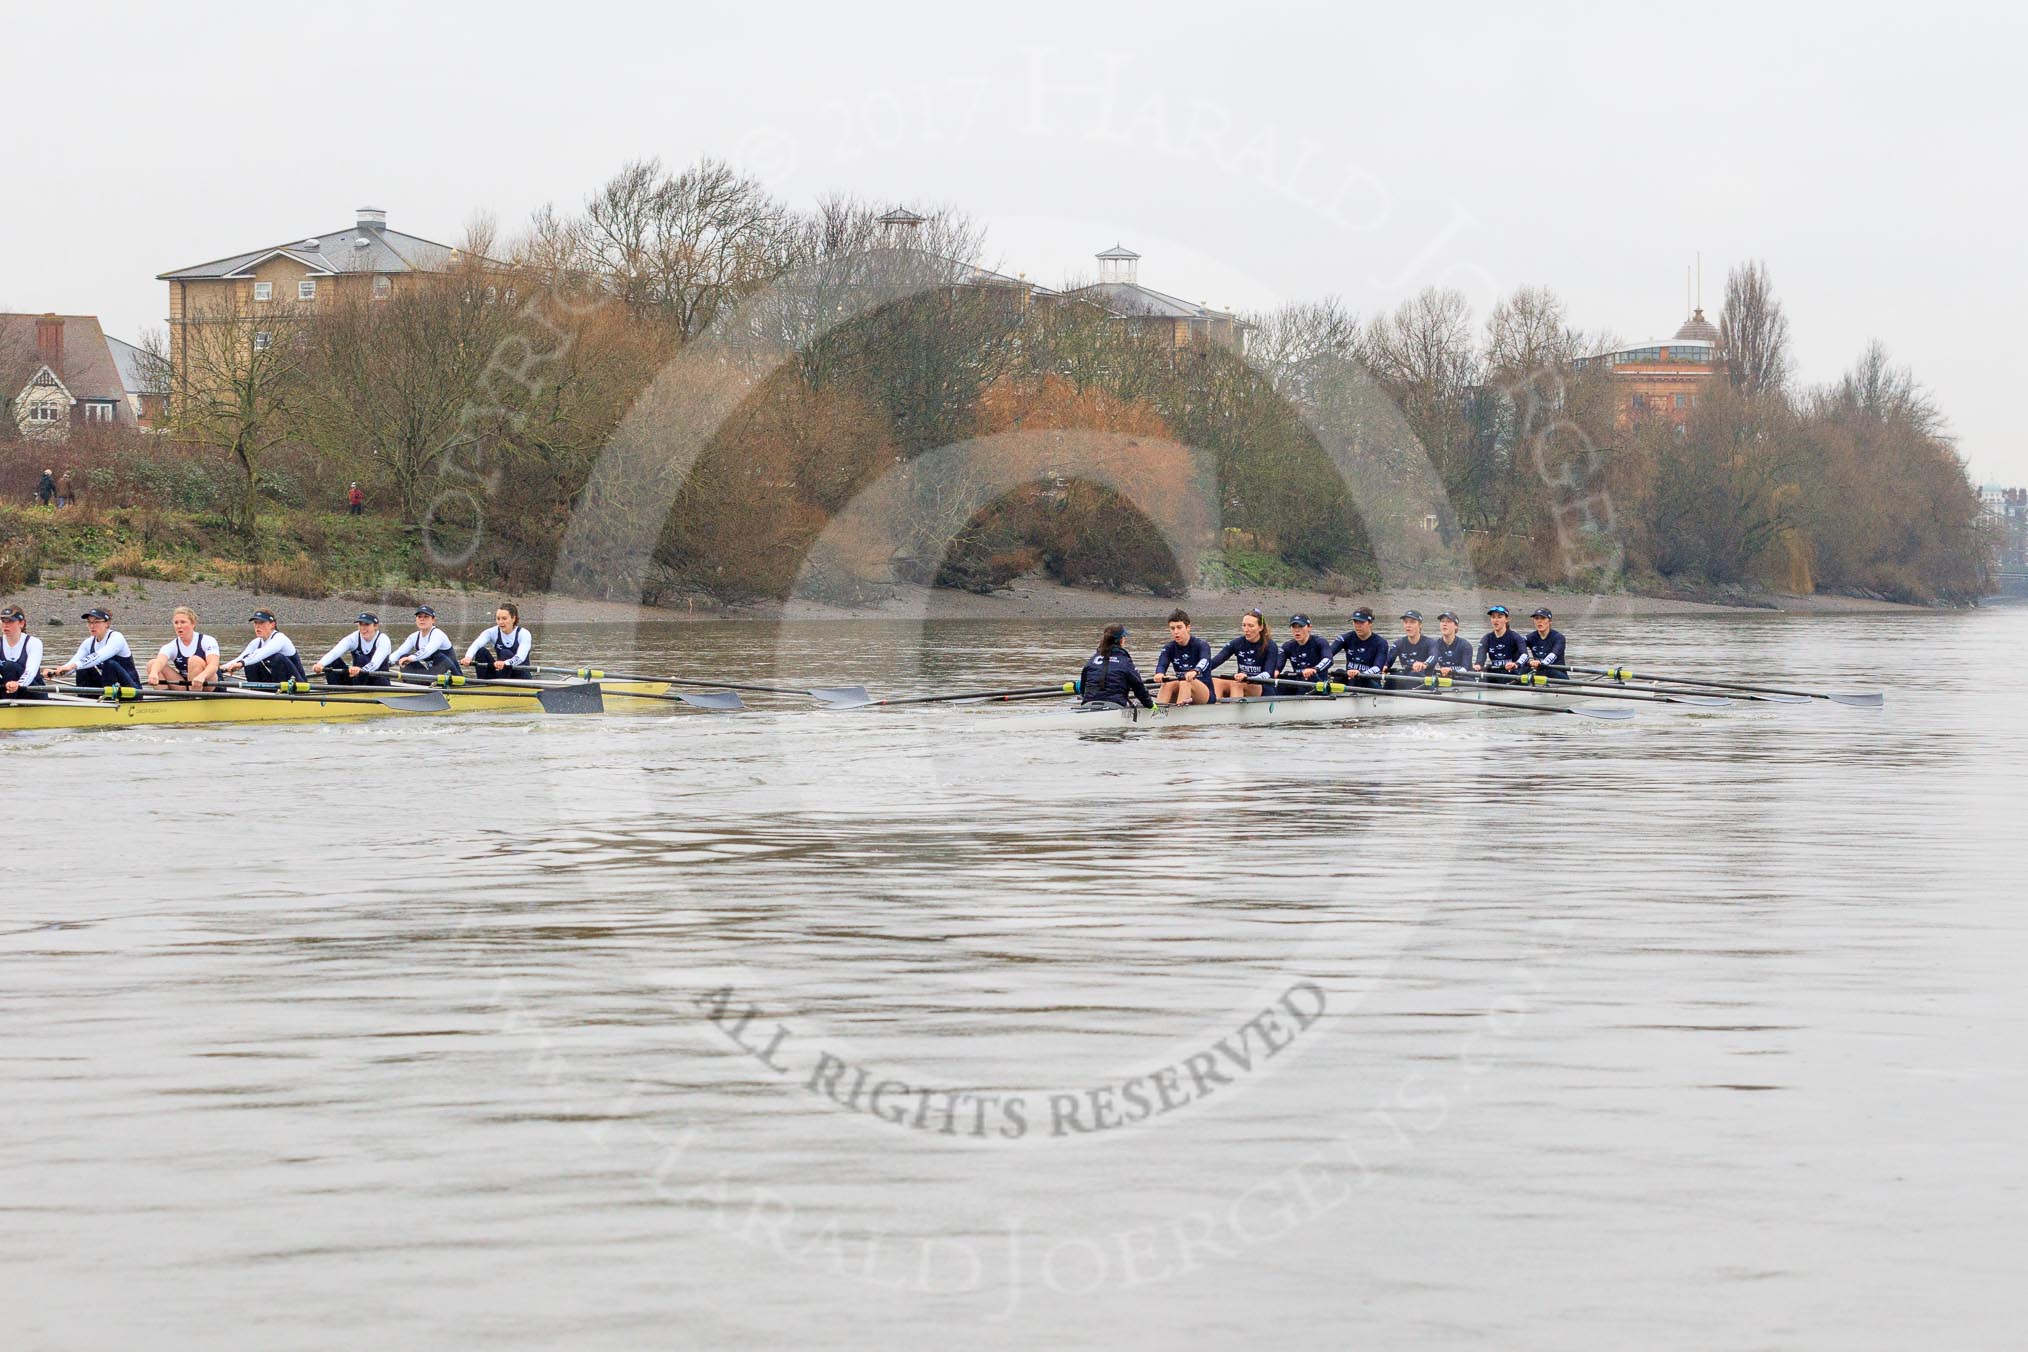 The Boat Race season 2018 - Women's Boat Race Trial Eights (OUWBC, Oxford): "Coursing River" and "Great Typhoon" after passing the Mile Post.
River Thames between Putney Bridge and Mortlake,
London SW15,

United Kingdom,
on 21 January 2018 at 14:32, image #84